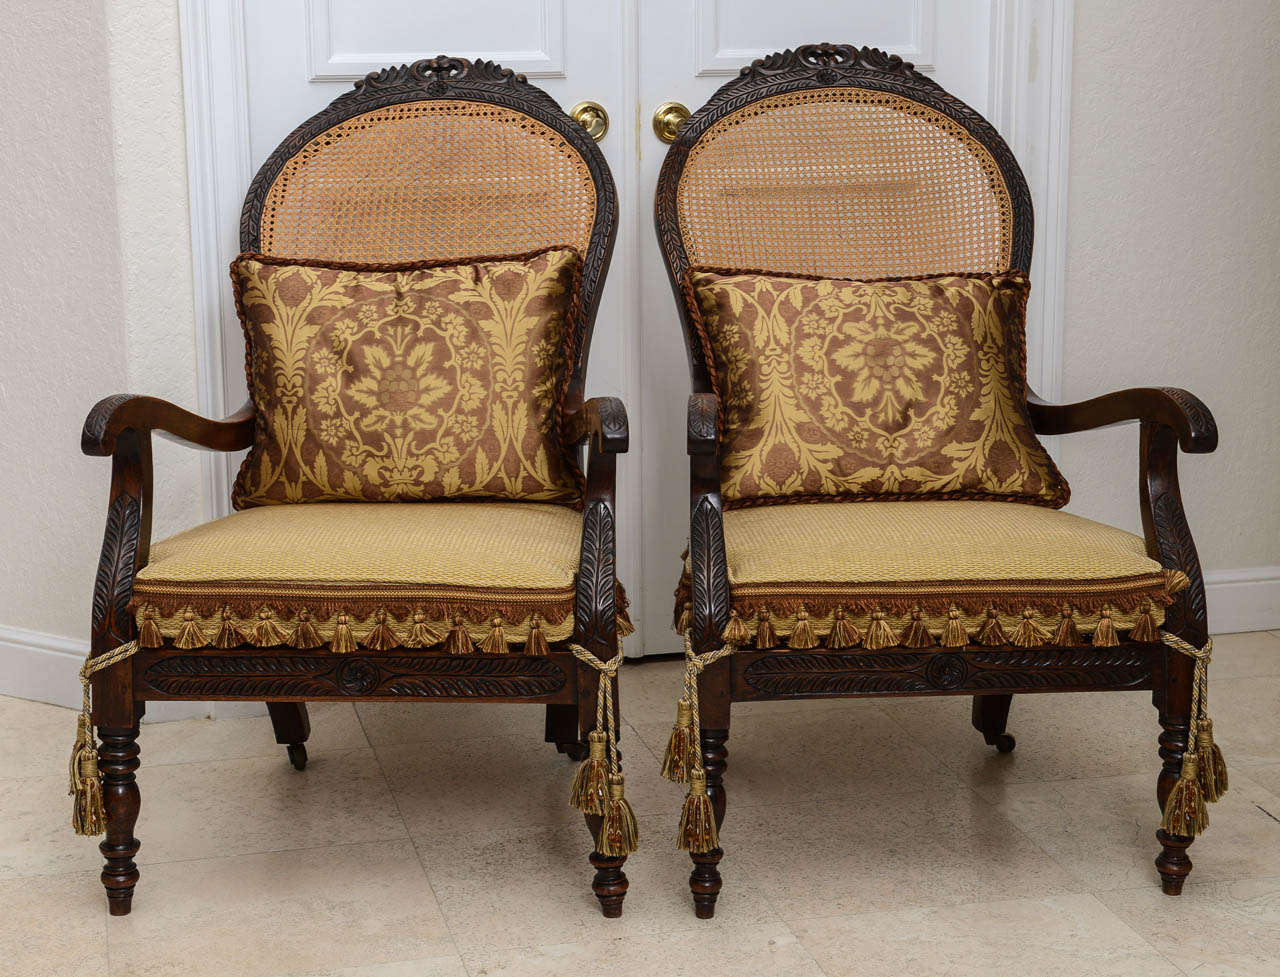 Pair of unusual French armchairs with a pitched back. Beautifully hand carved with cane back and seat with custom seat cushions and tassel ties. Original restored finish.